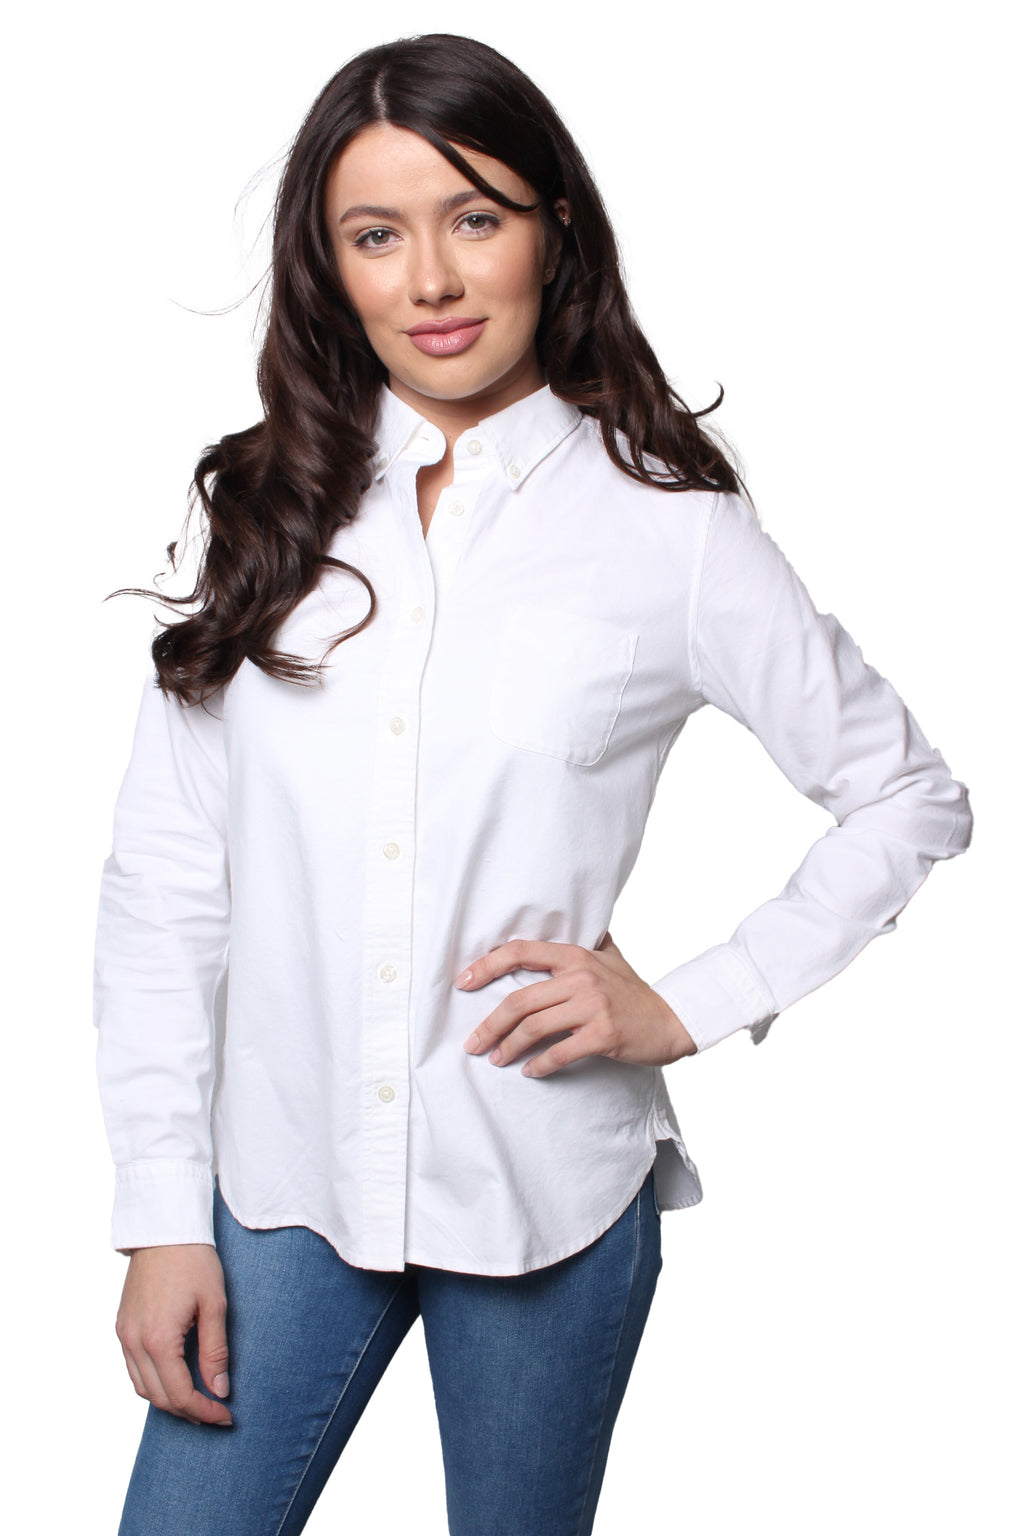 Women's Long Sleeve Button Down Solid Top